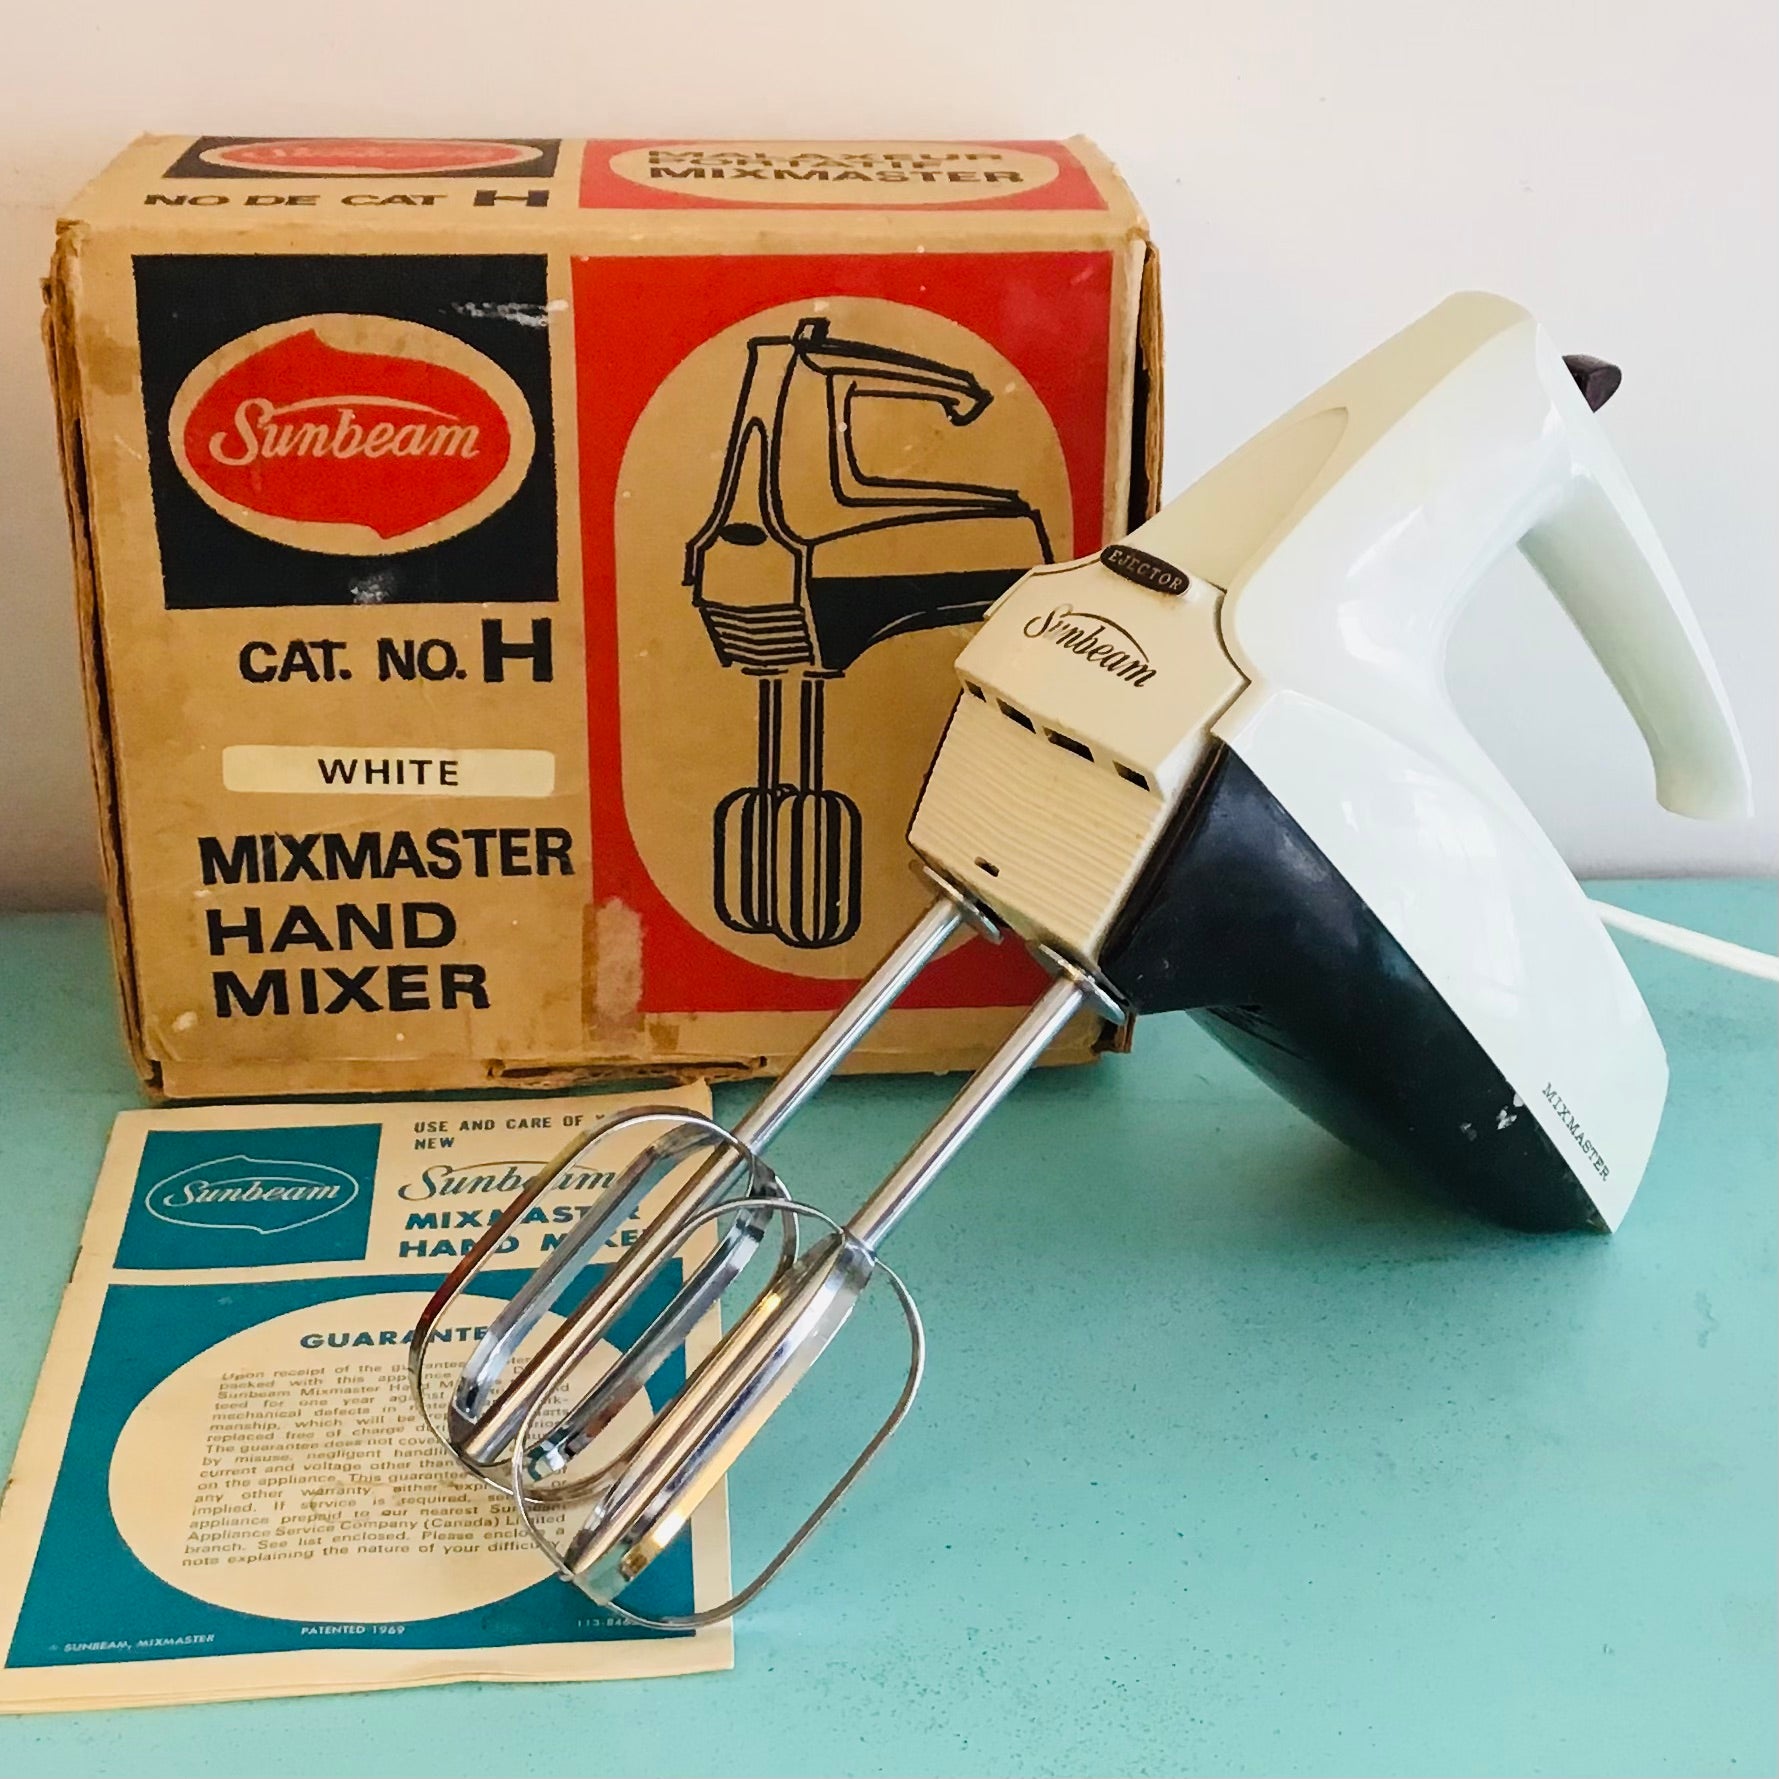 Vintage hand mixers: home and professional kitchenware - Loison Museum